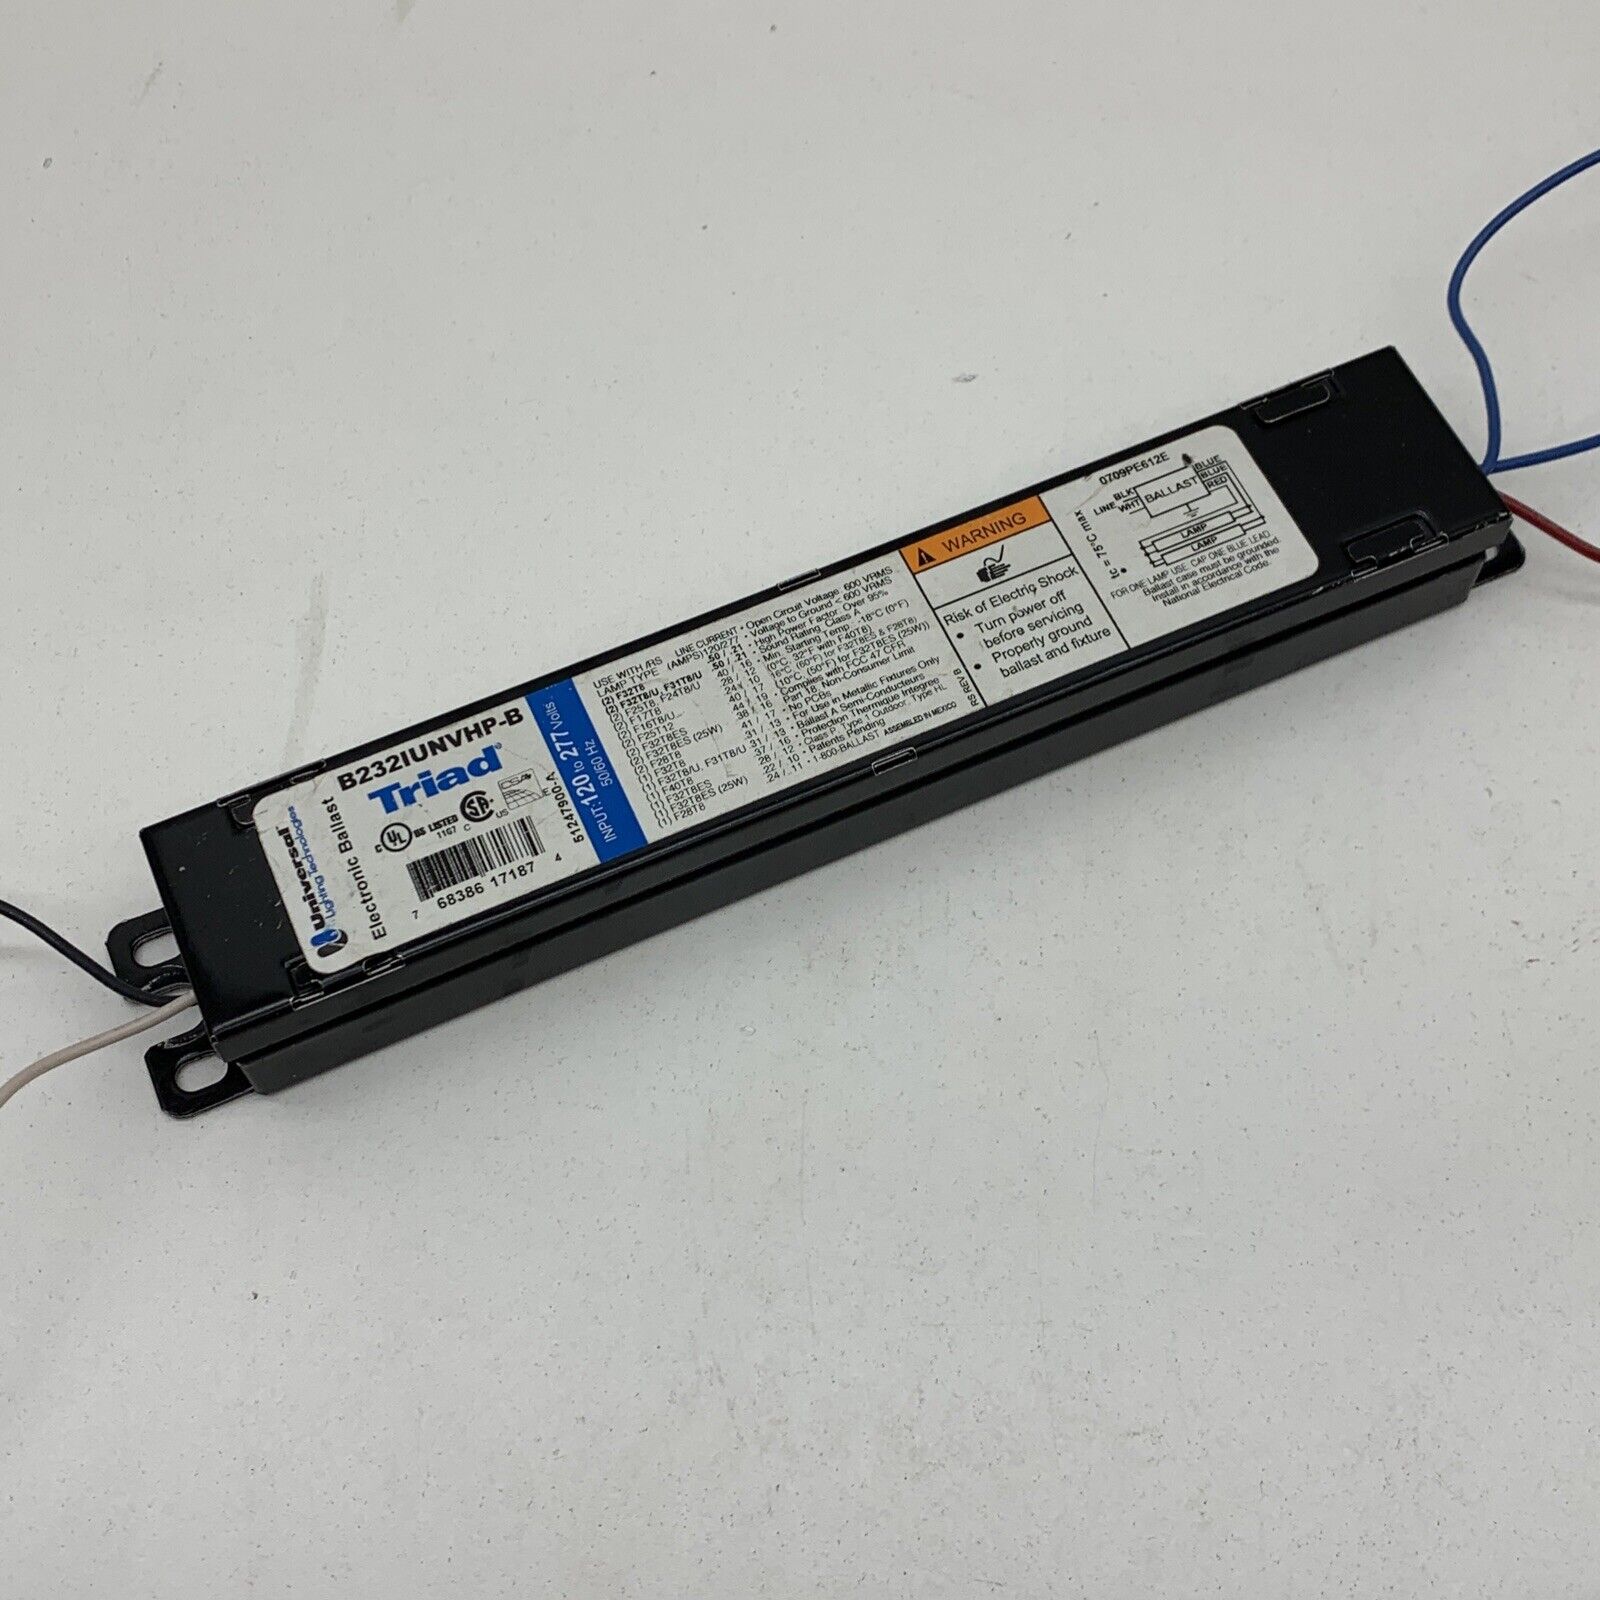 Universal Triad B232IUNVHP-B Electronic Fluorescent Ballast for (2) F32T8 Lamps